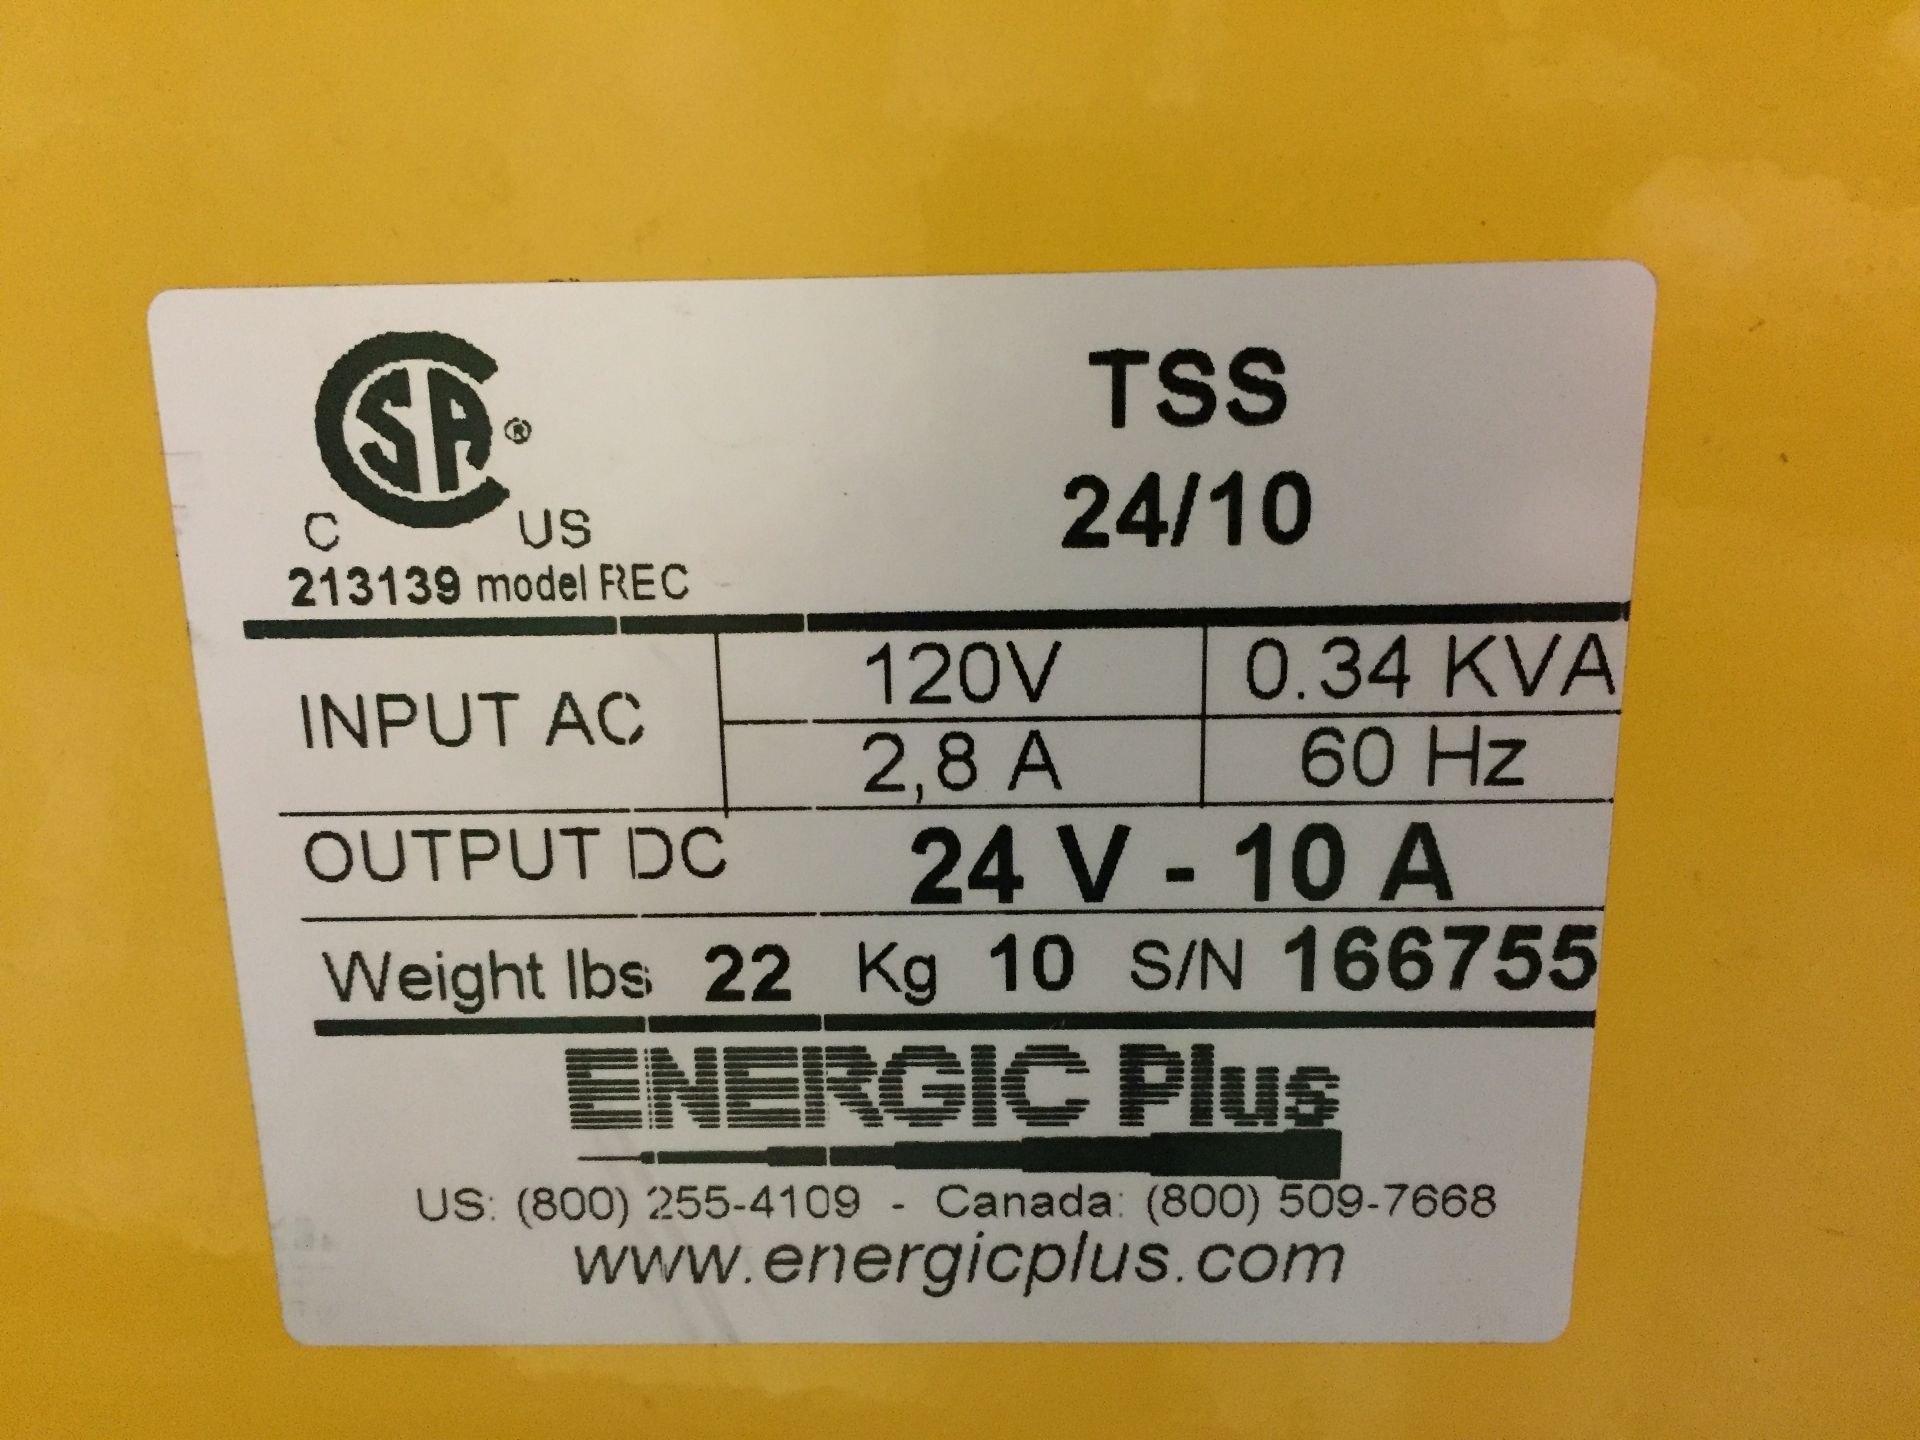 Energic Plus TSS 24/10 24V Battery Charger, 10 Amp Max Ouptut, S/N: 166755 - Image 2 of 2